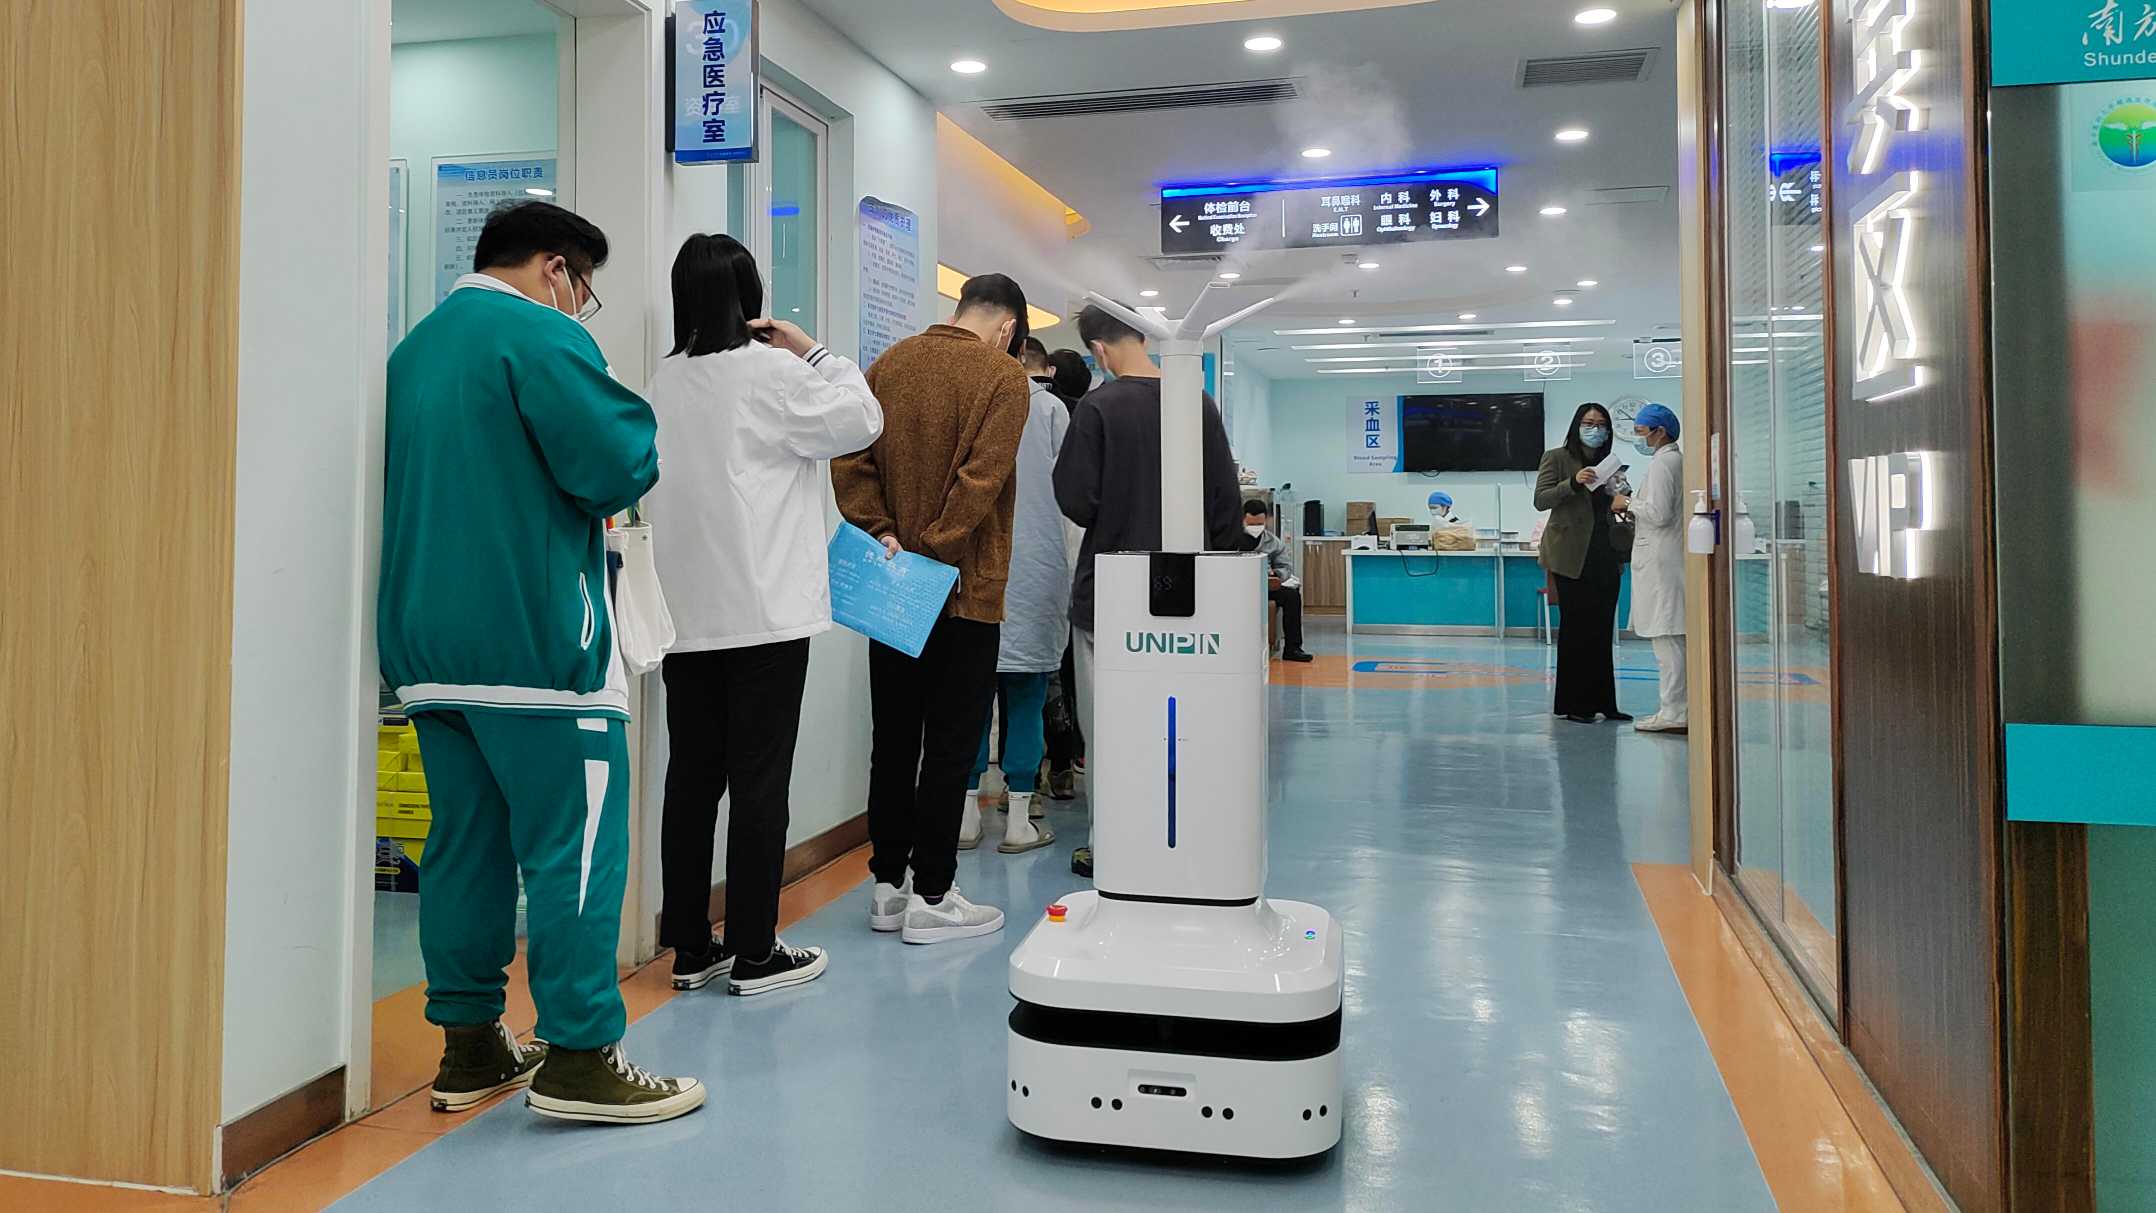 A Medical center in Foshan hospital disinfection solution - Spray disinfection robot